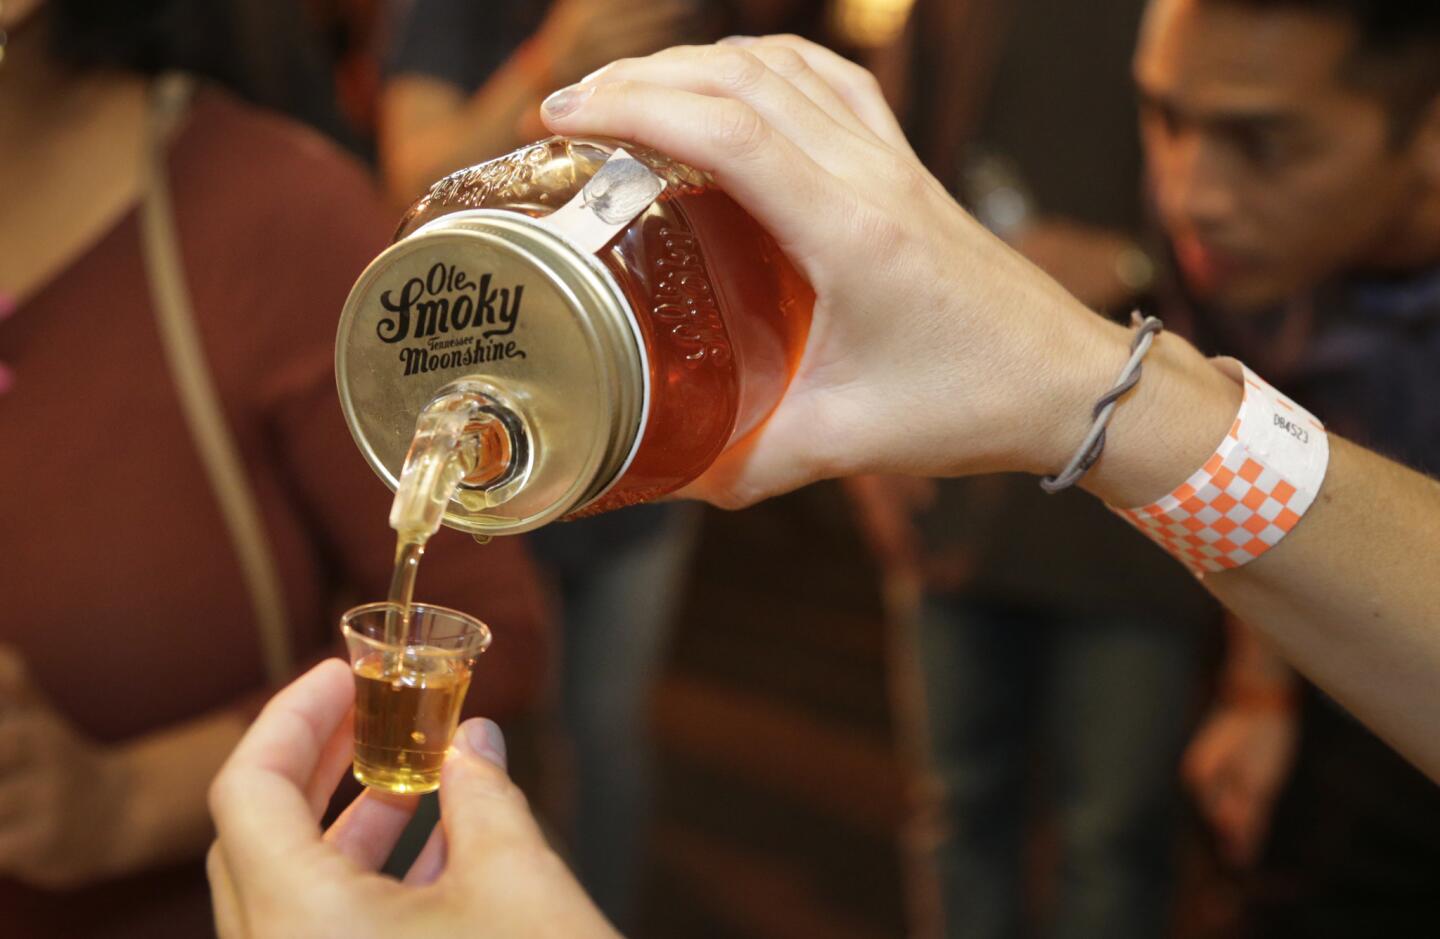 Apple pie moonshine from Ole Smoky Tennessee Moonshine